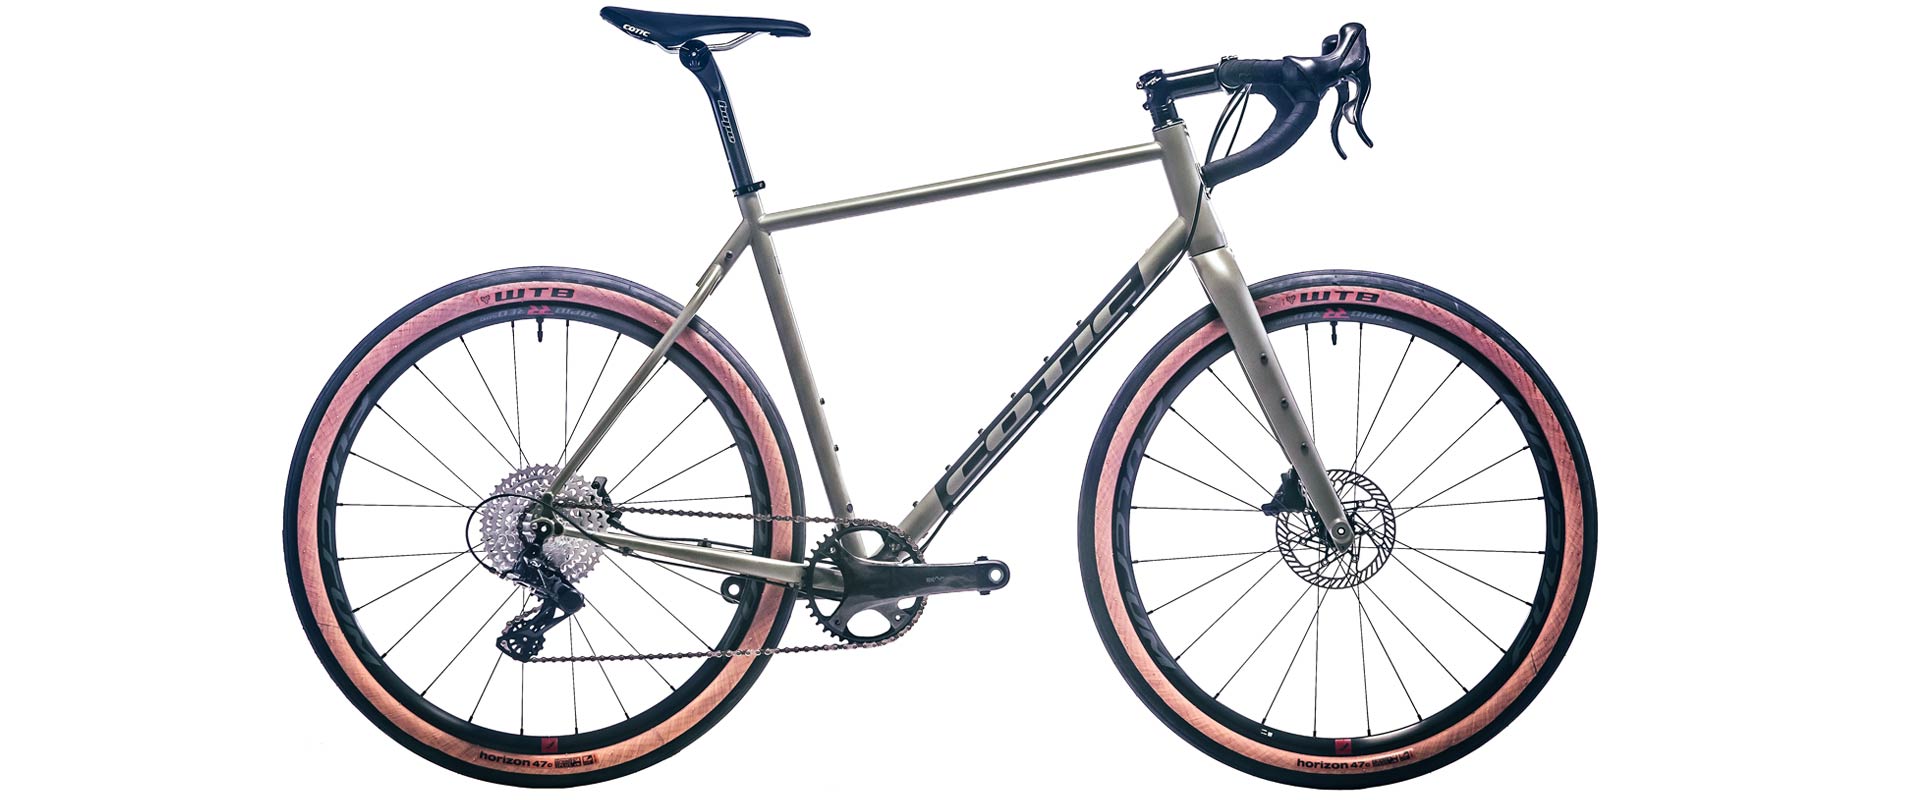 escapade, stock, geared, drop bar, complete, bicycle, frames, frame, commute, complete bike, road, gears, Escapade, uk, wheels, shimano, brakes, tough, Commuting, training, touring, cyclocross, family rides, courier work, 700c, 650b, road plus, gravel, adventure